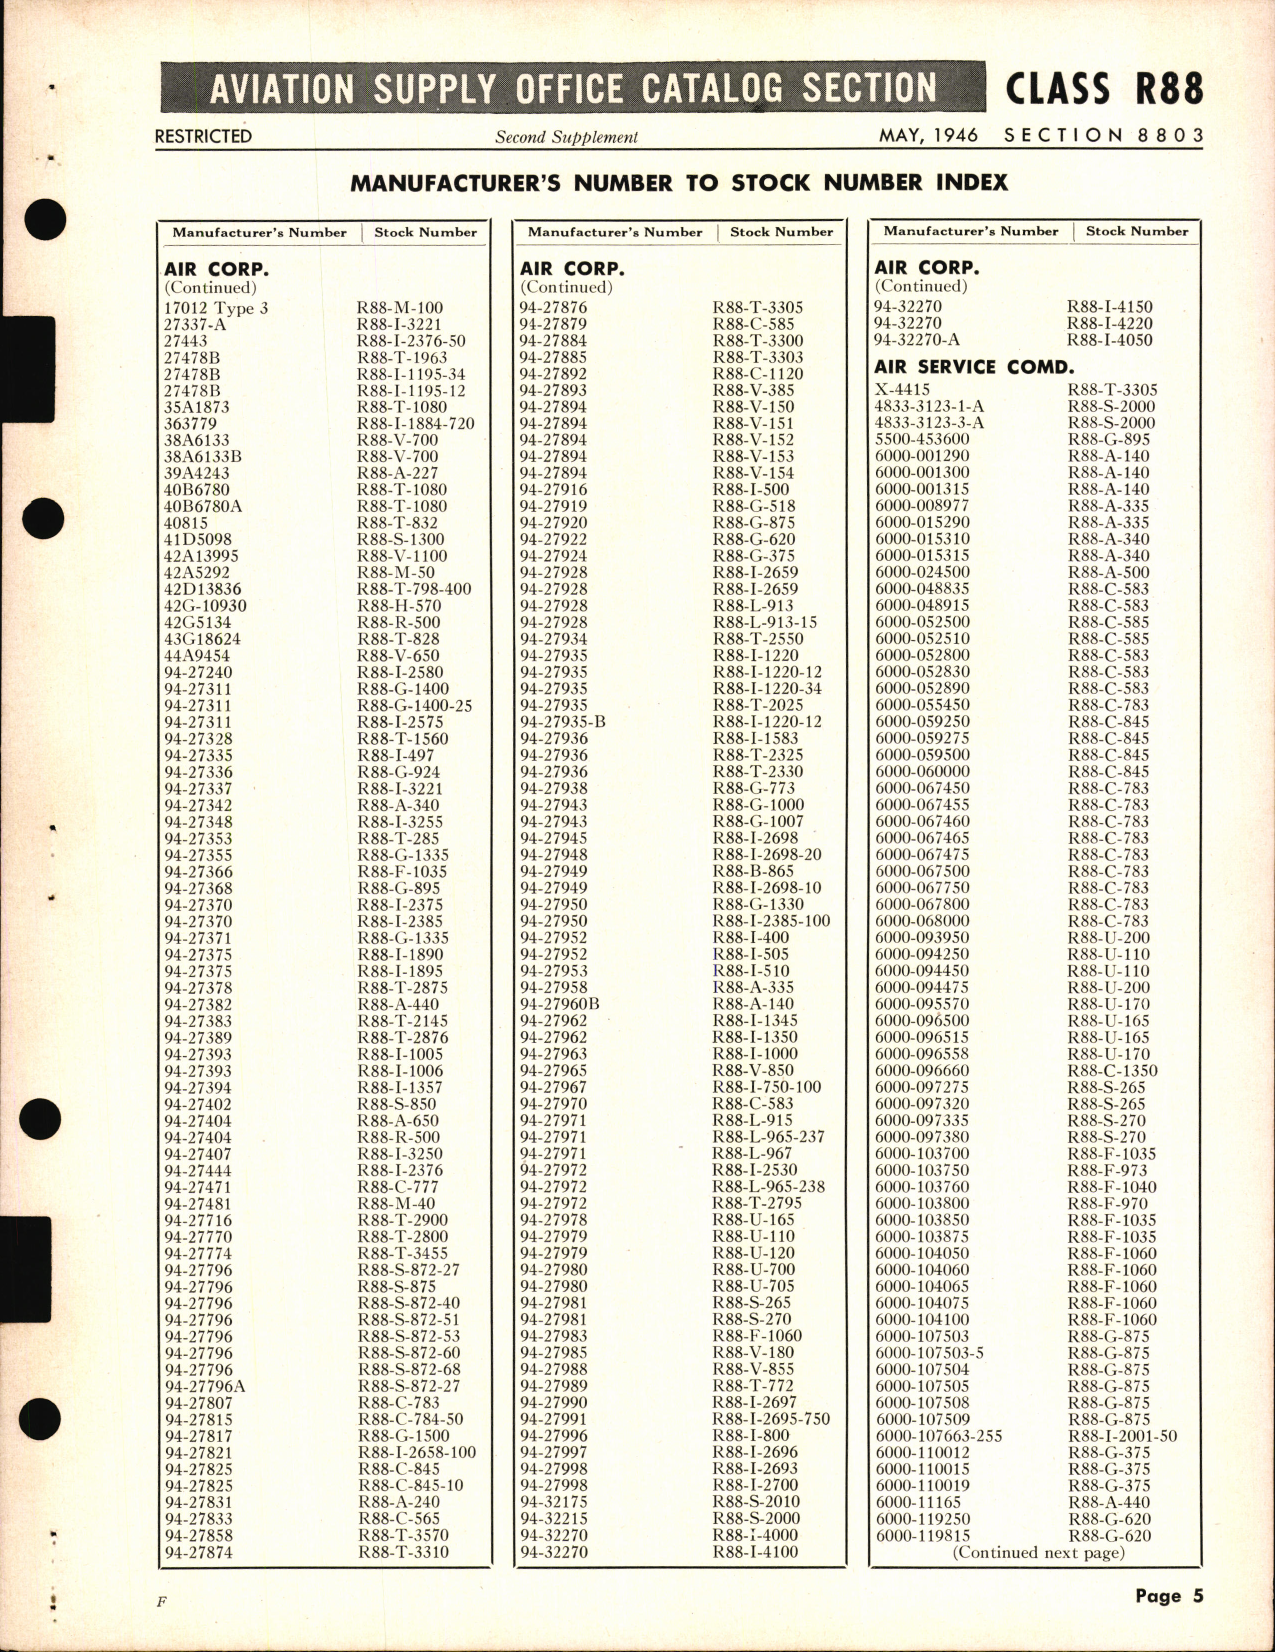 Sample page 5 from AirCorps Library document: Aeronautical Instruments Supplement-2